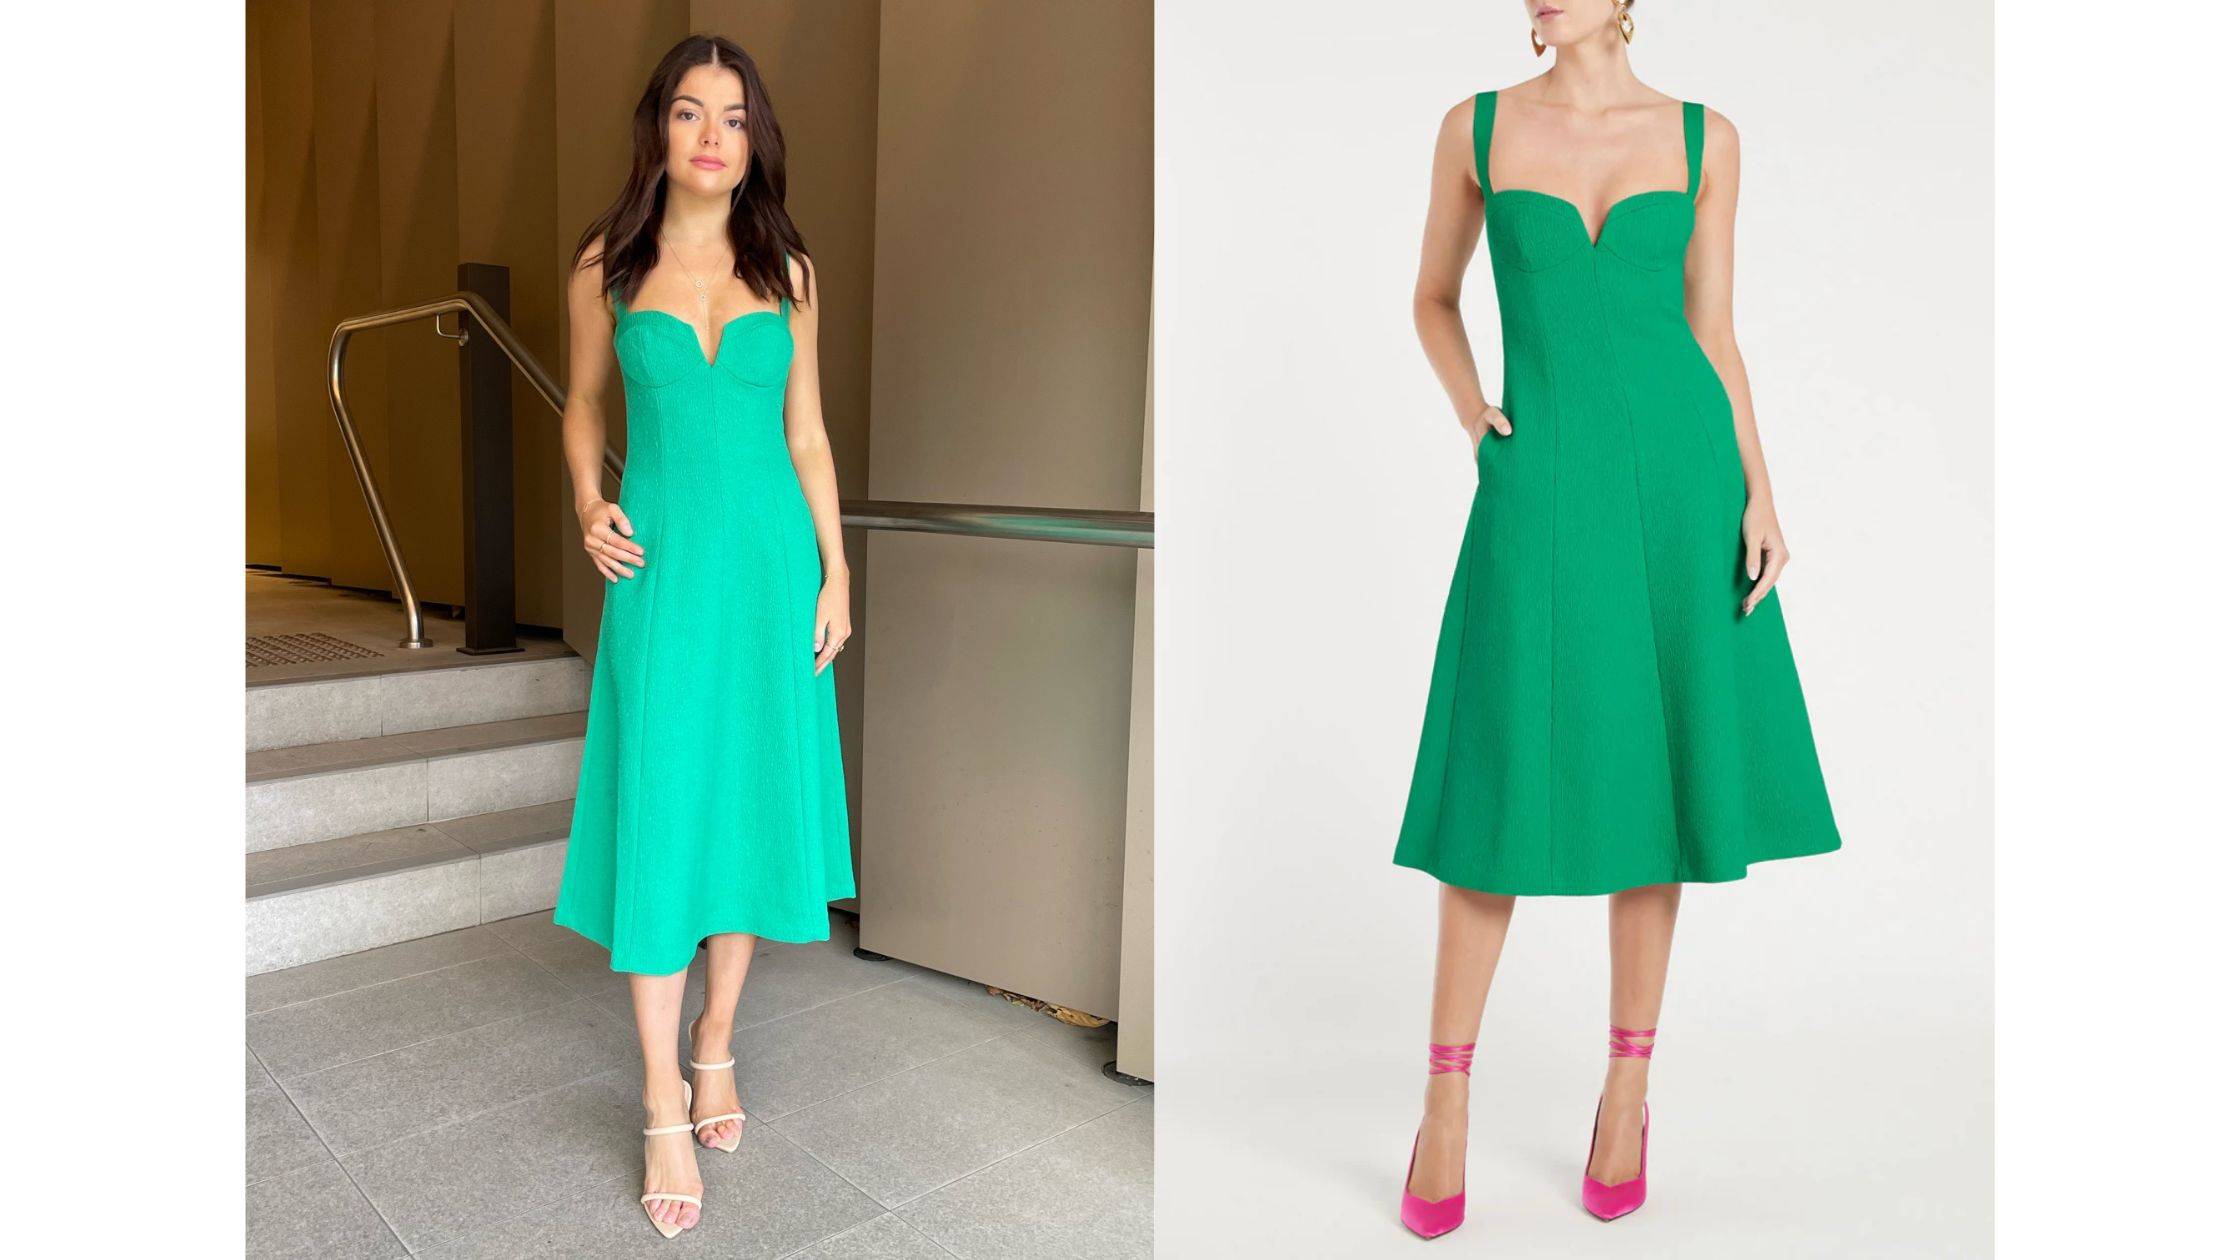 What Color Cardigan To Wear With A Green Dress?